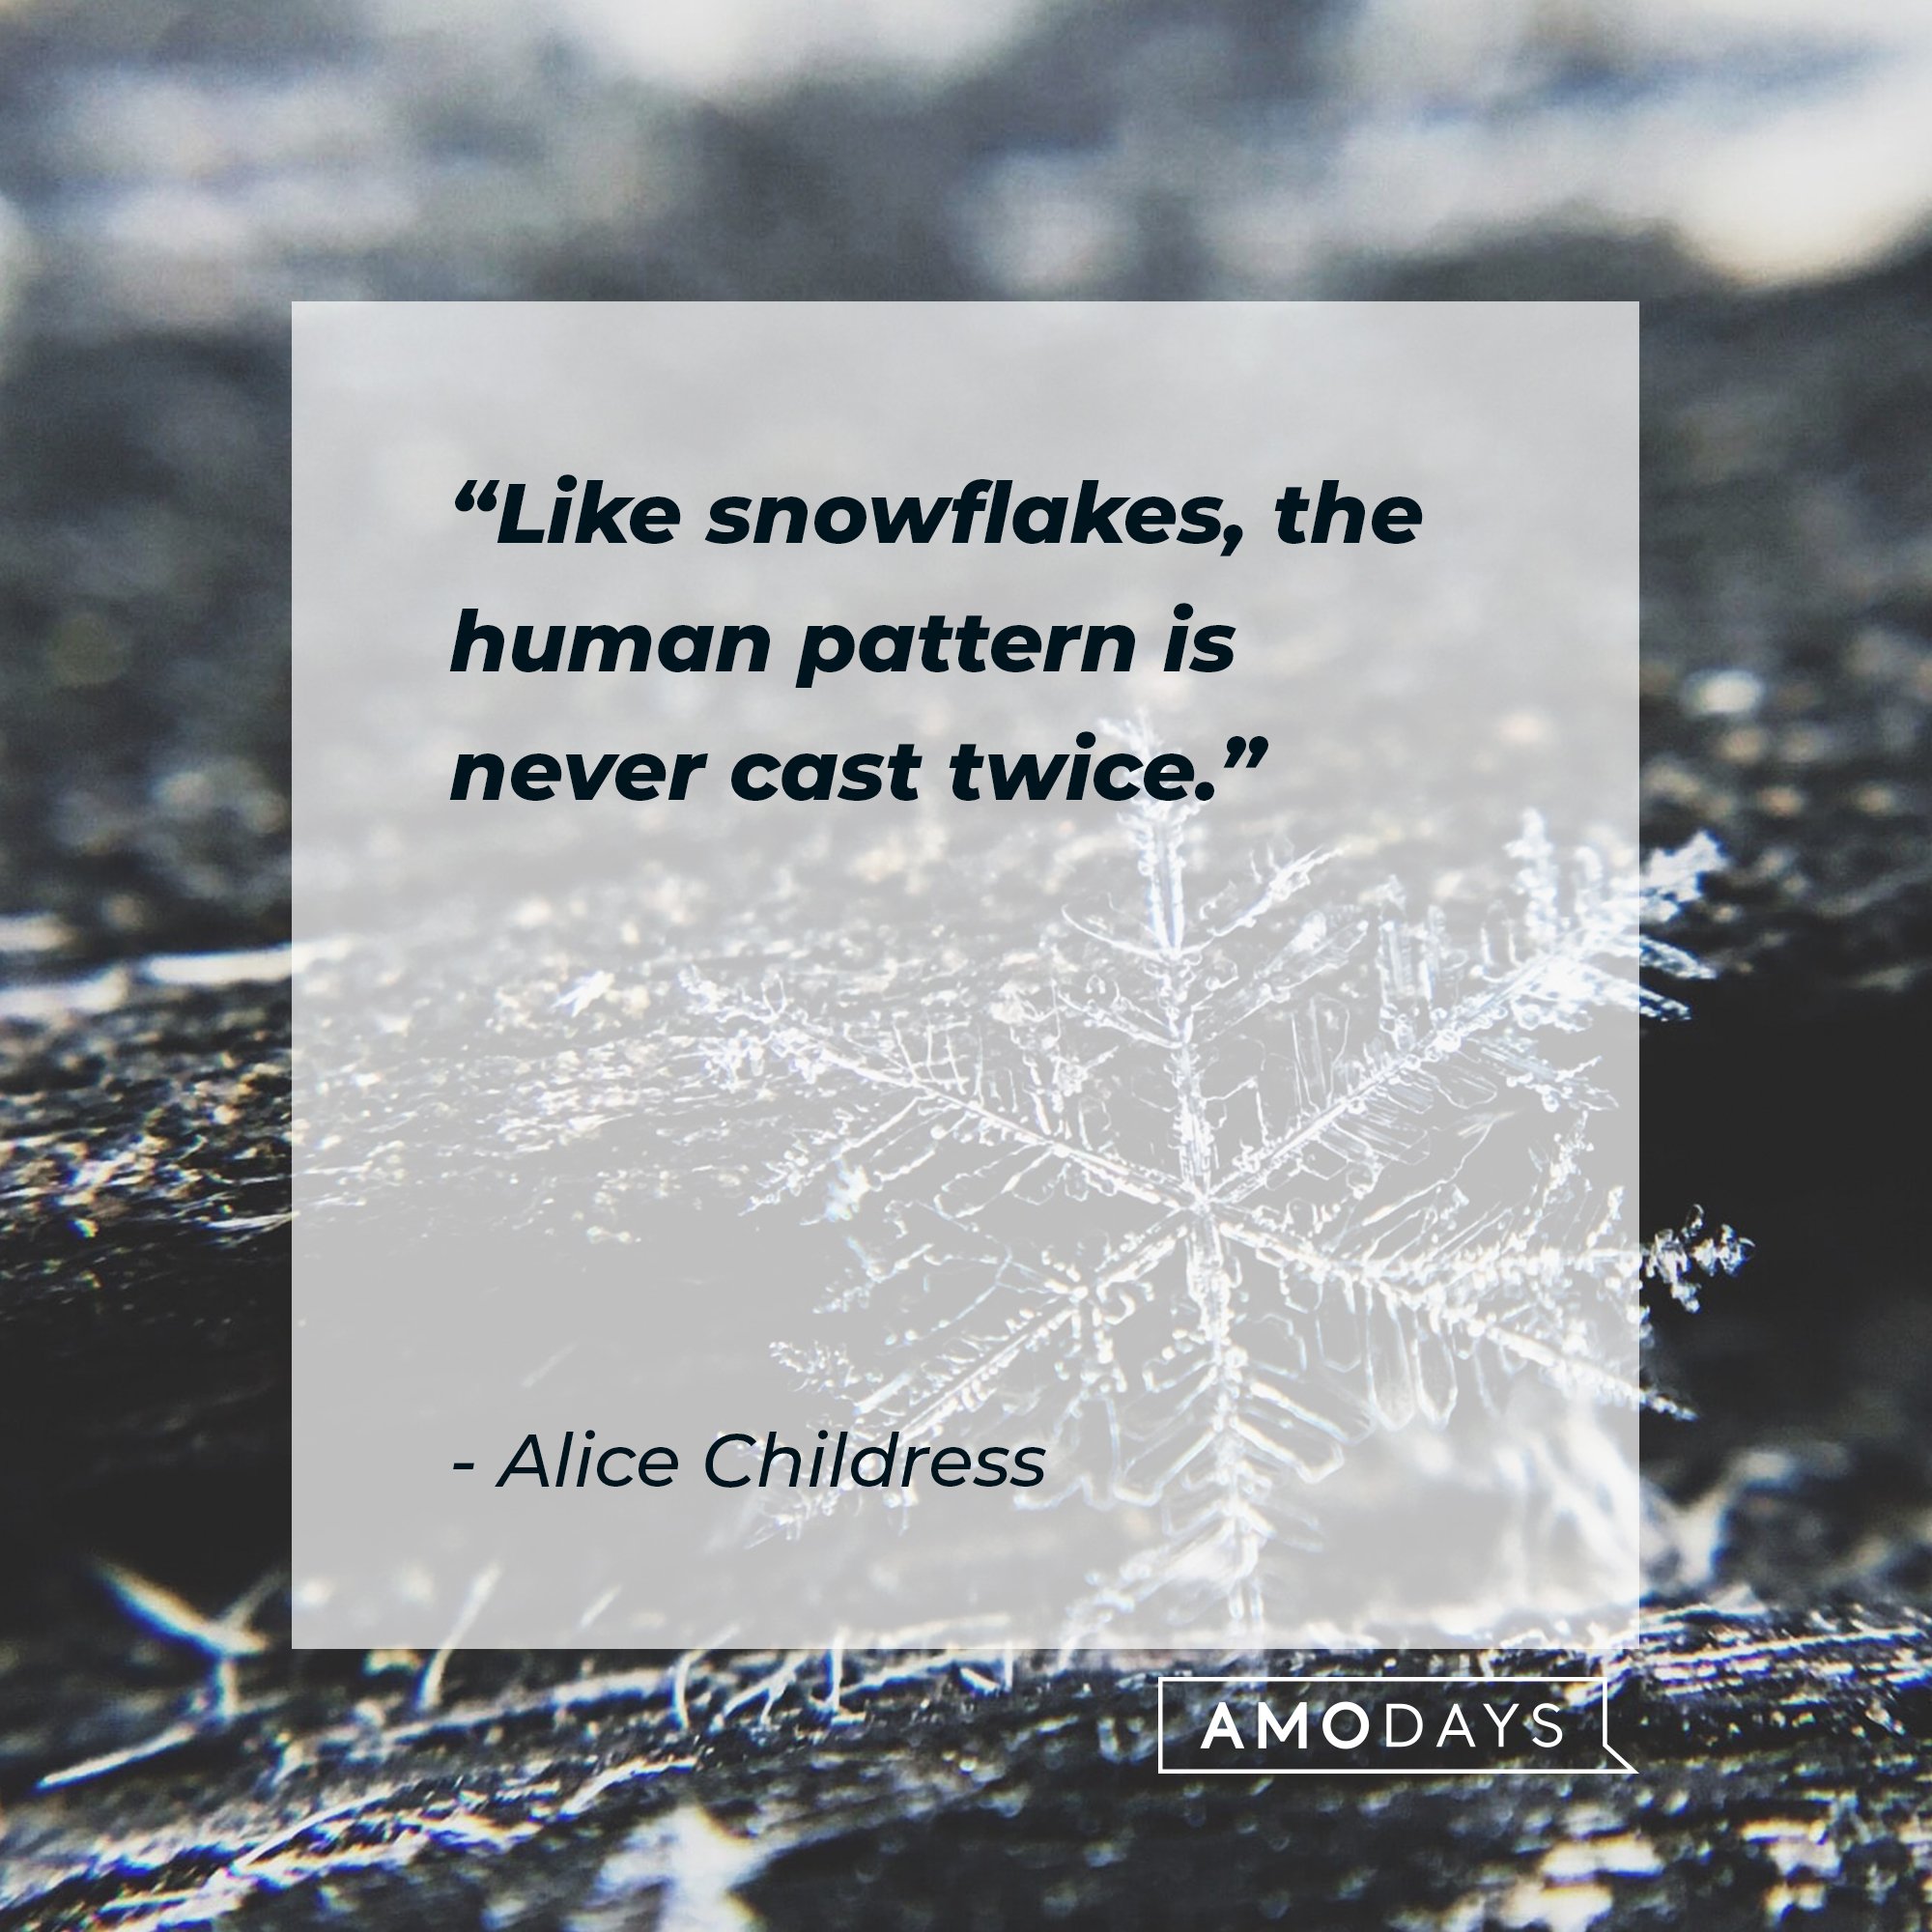   Alice Childress’ quote: "Like snowflakes, the human pattern is never cast twice." | Image: AmoDays